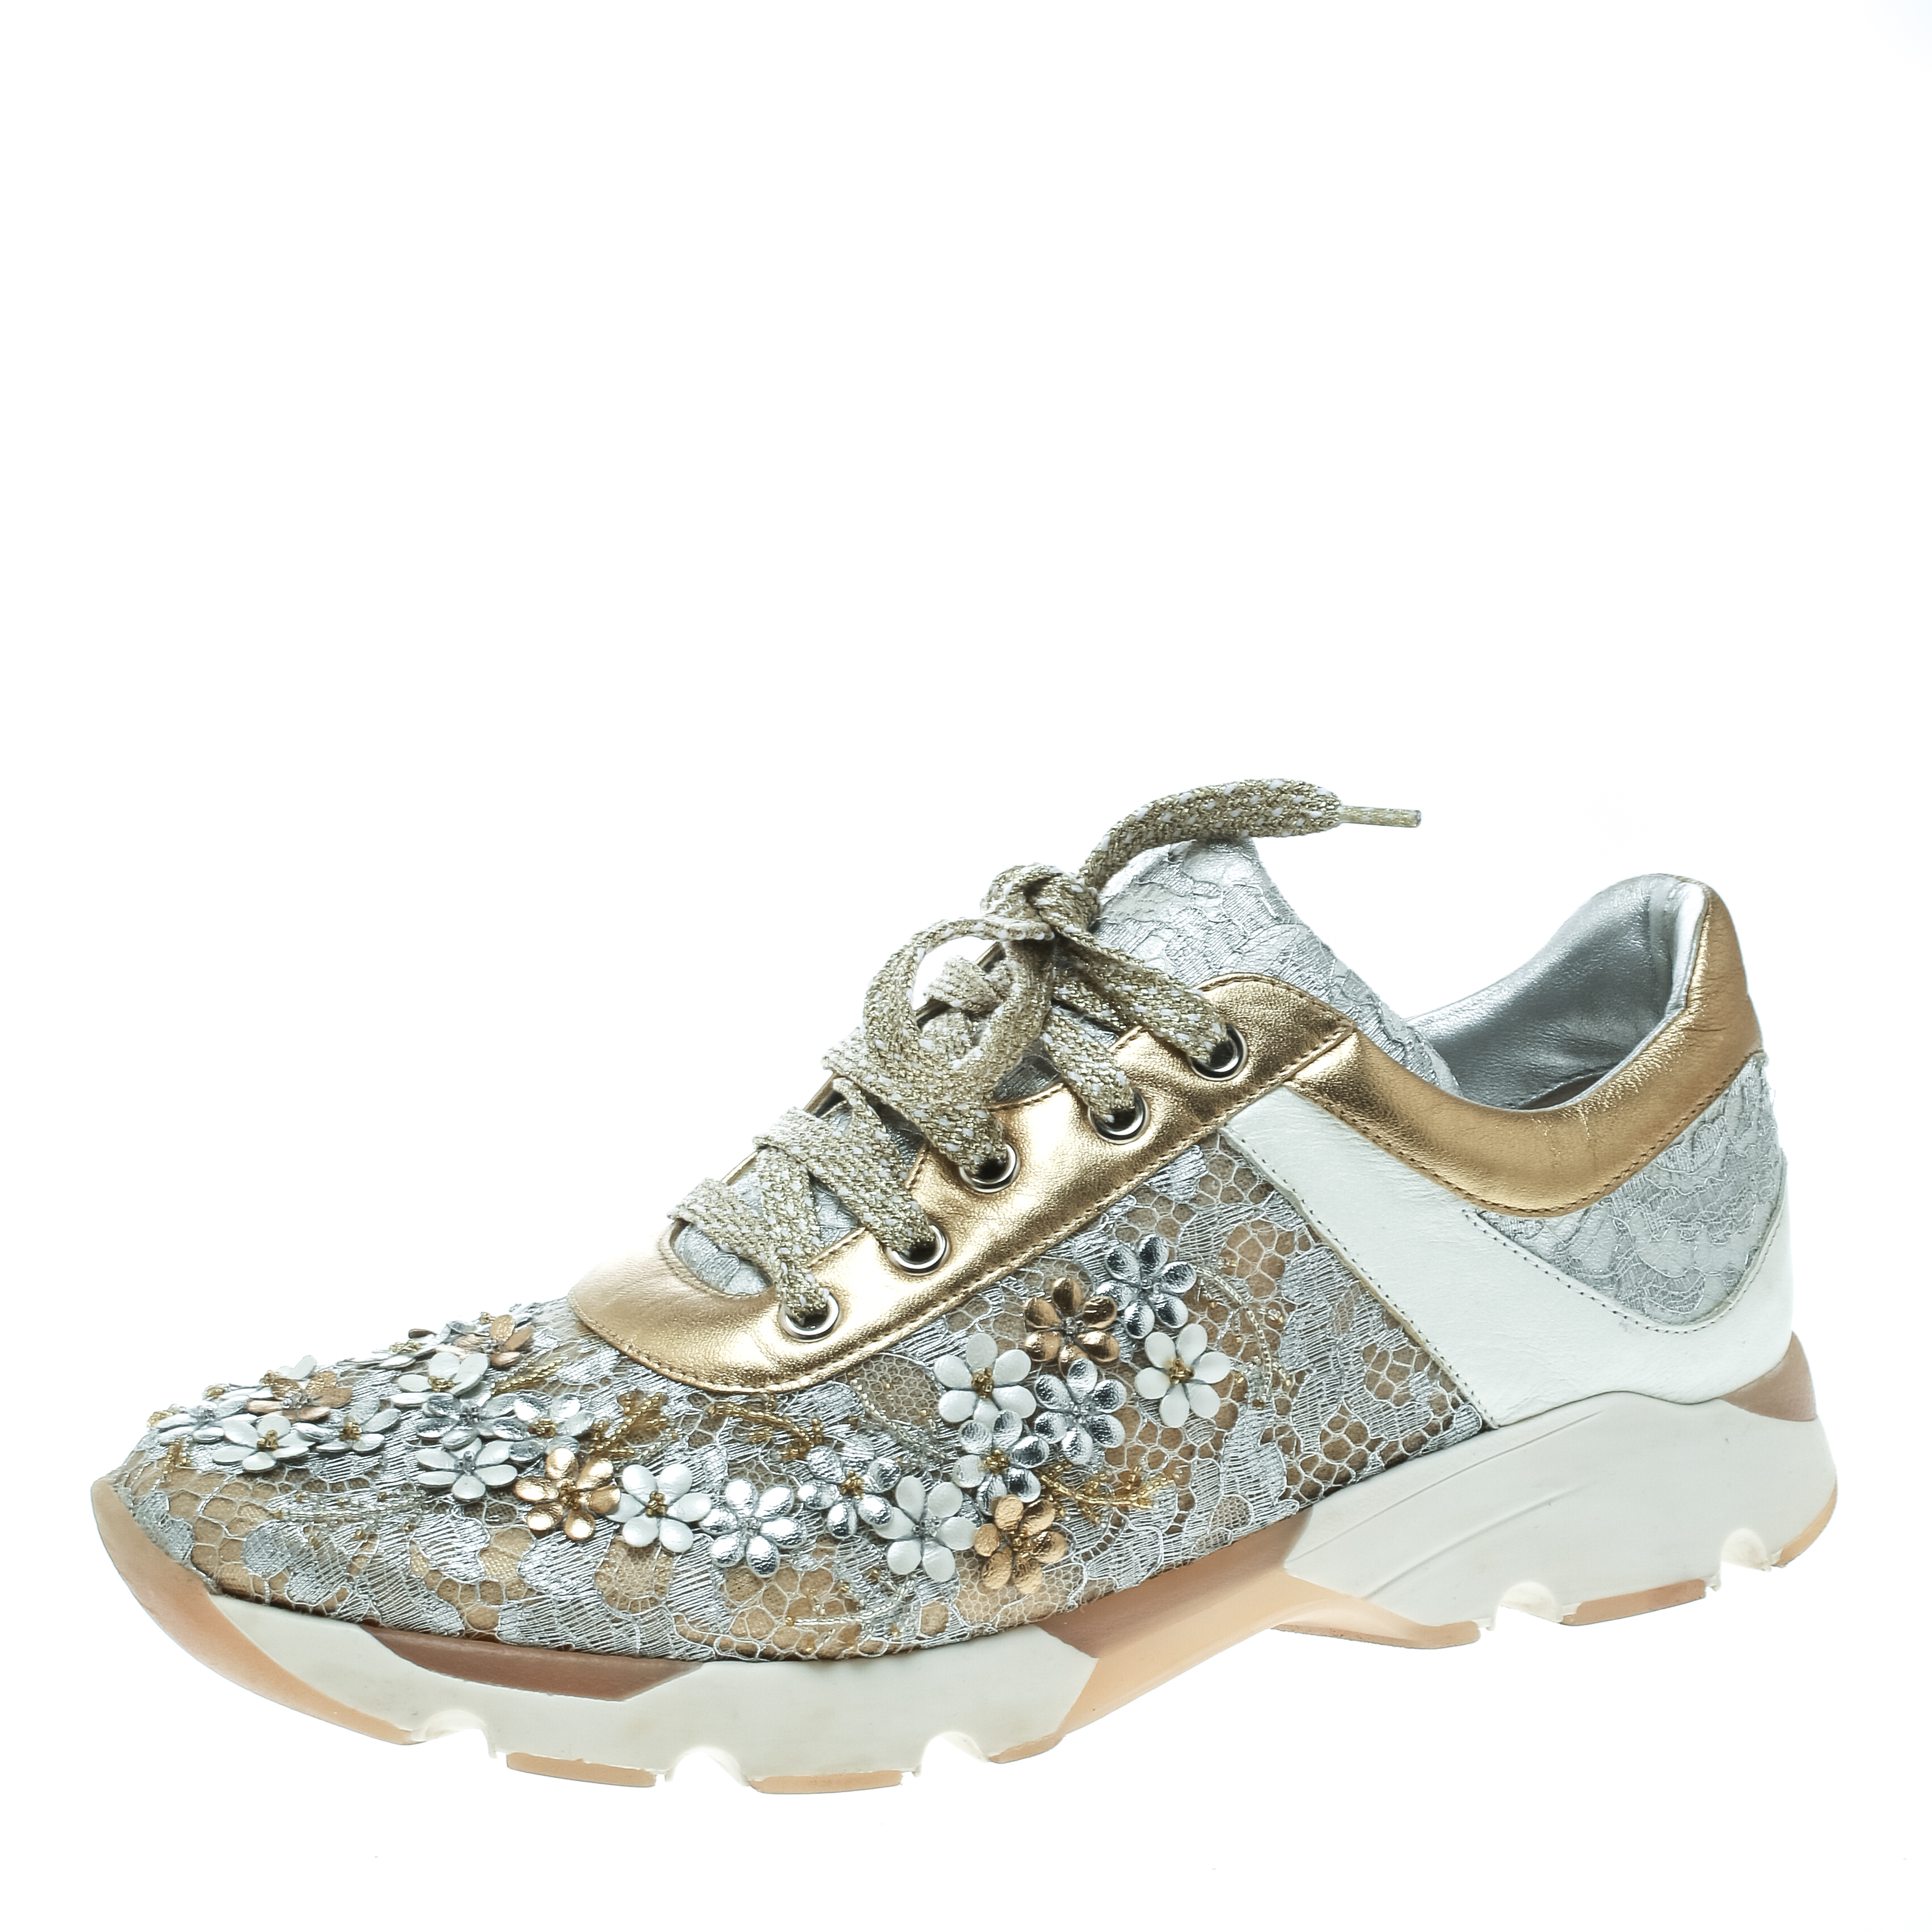 Rene Caovilla Beige/White Lace Flower Embellished Lace Up Sneakers Size ...